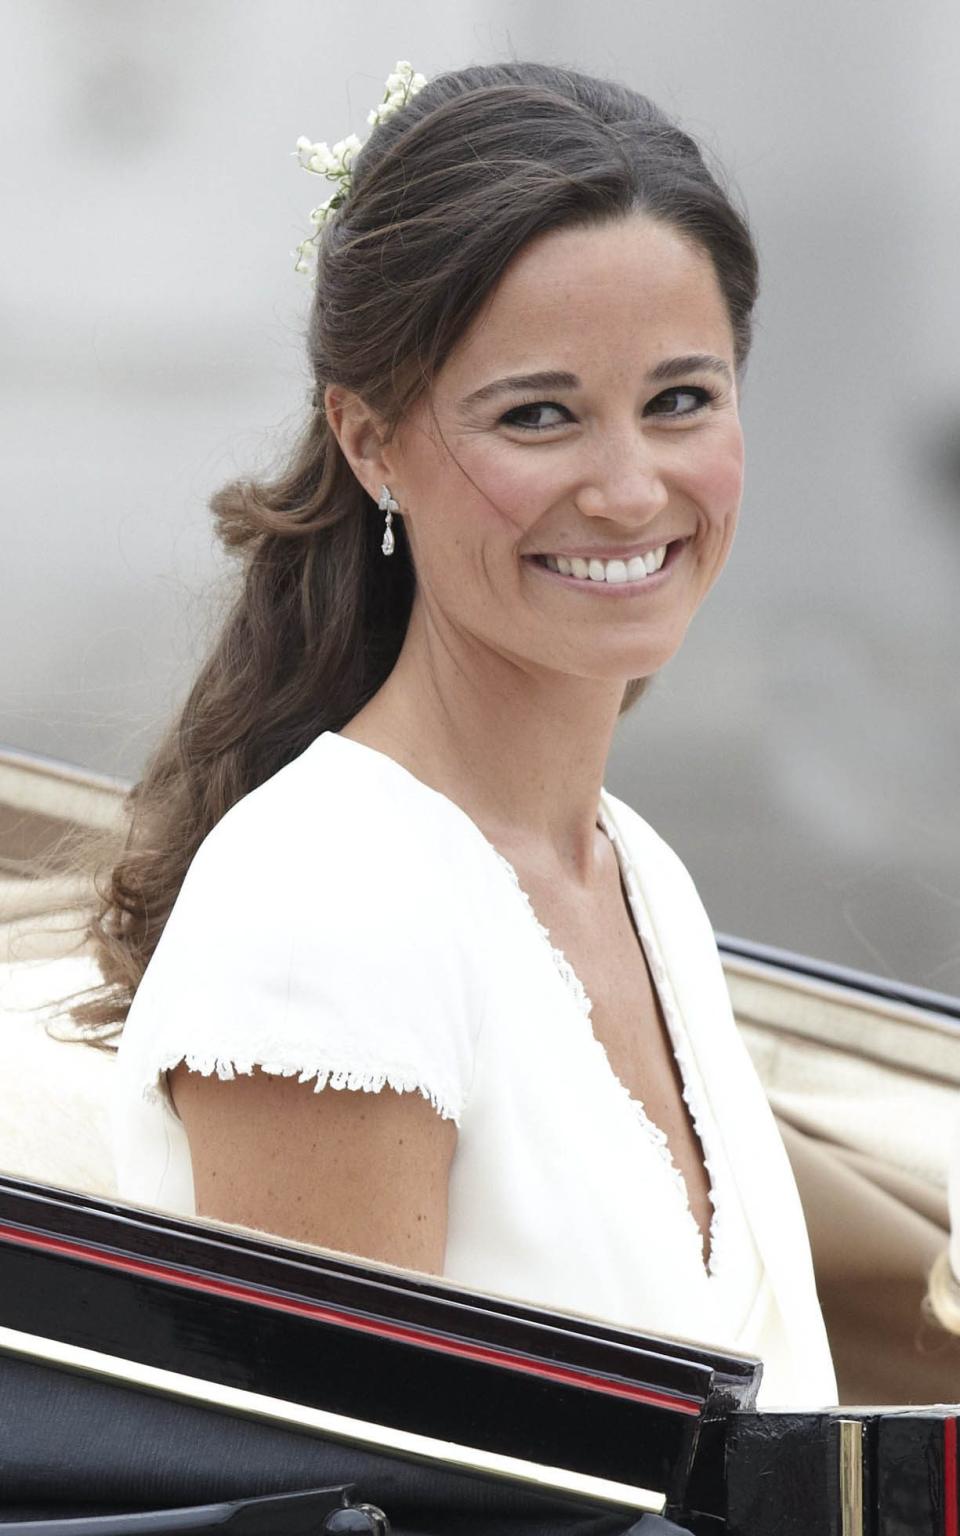 Pippa Middleton wearing the diamond earrings at the Duchess of Cambridge's wedding in 2011 - Credit: Rupert Hartley/REX/Shutterstock